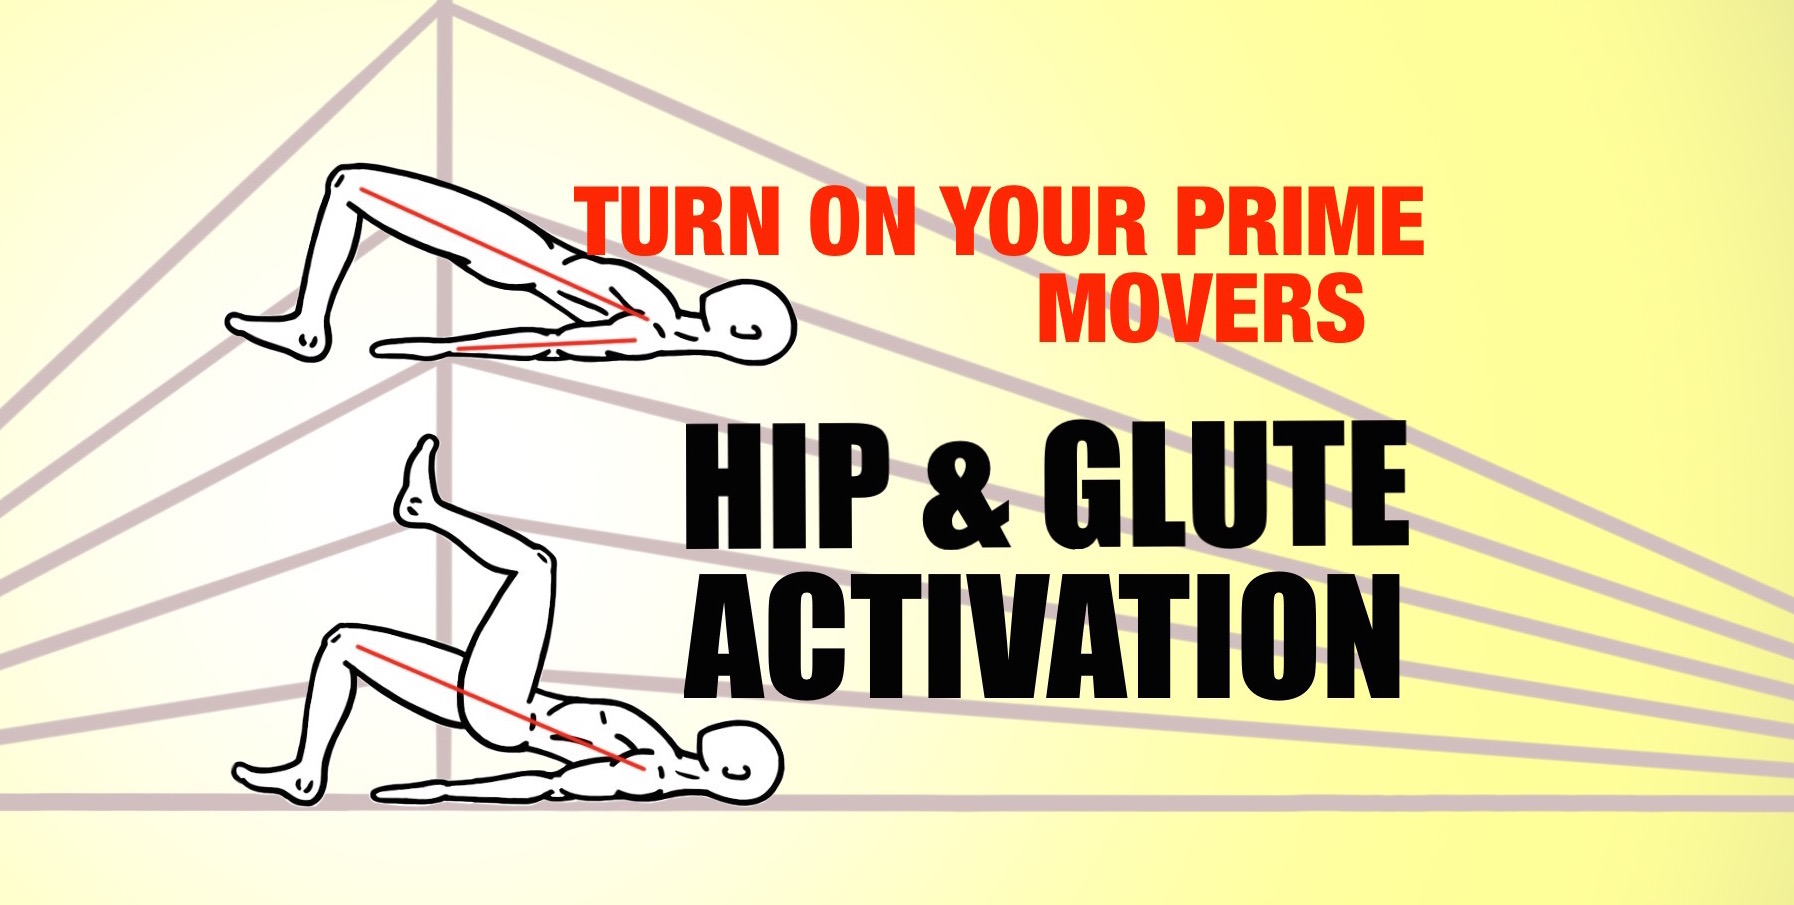 Marching Glute Bridges: How to Activate Your Glutes for a Firmer